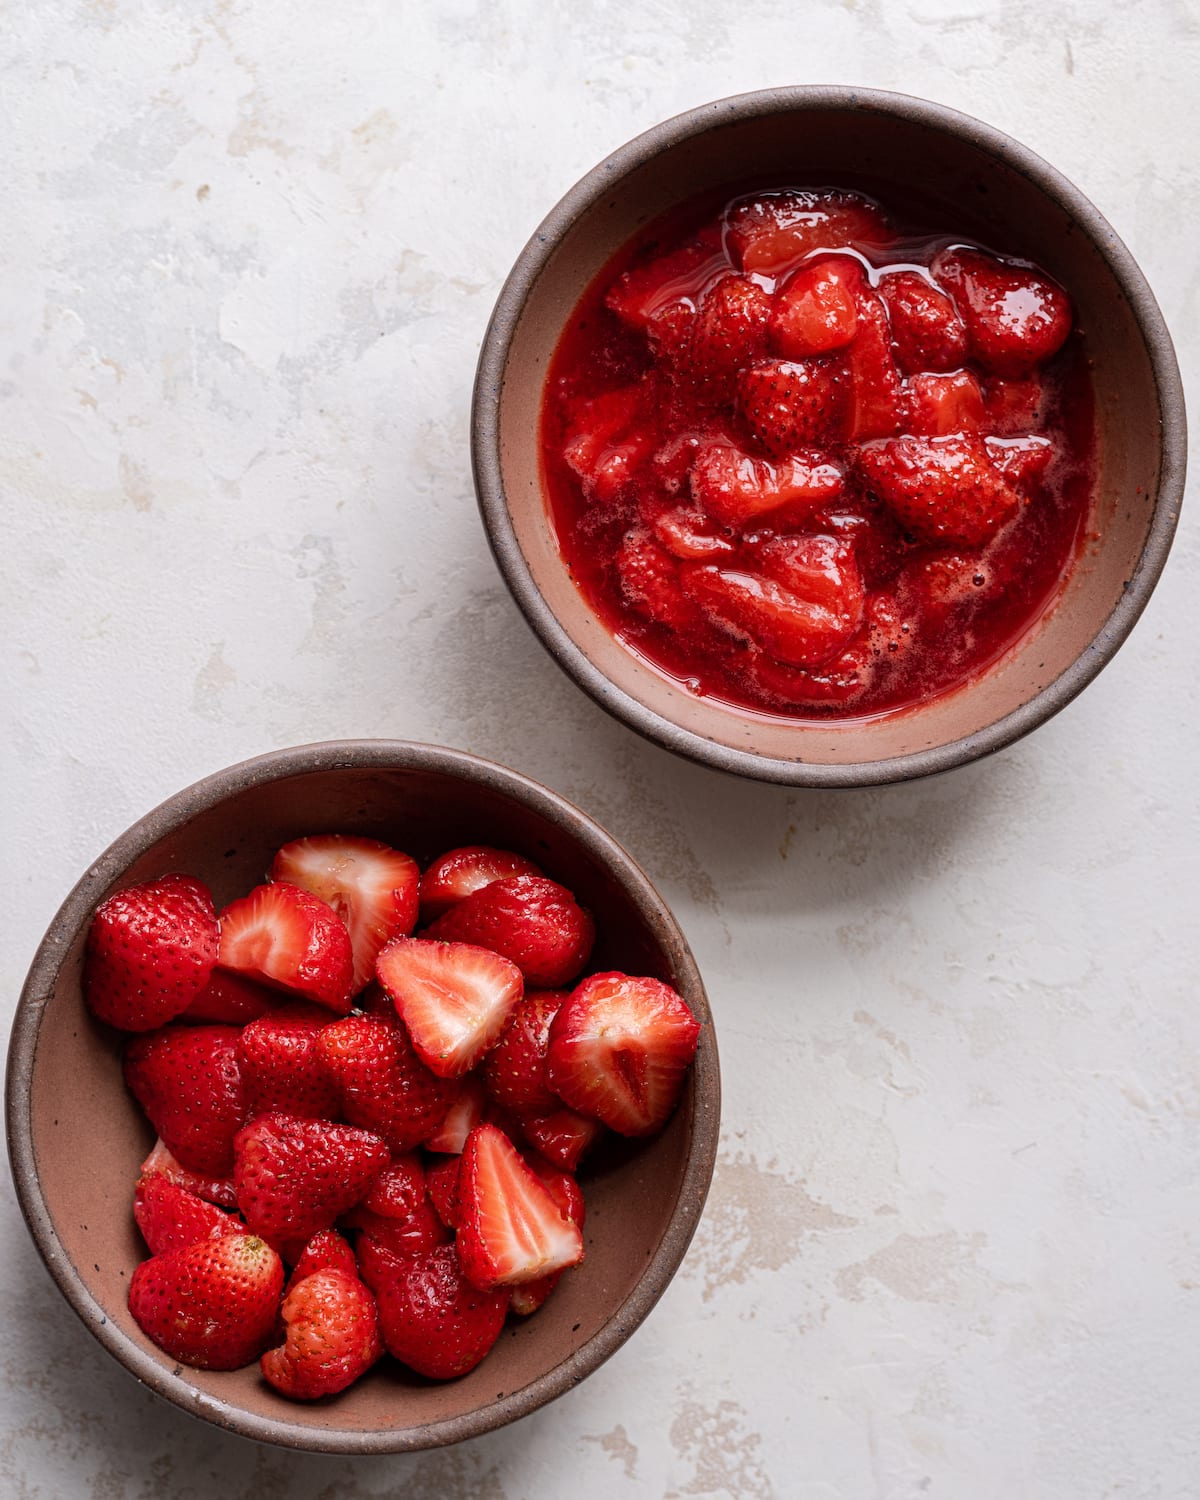 two bowls, one with strawberries, one with strawberry compote